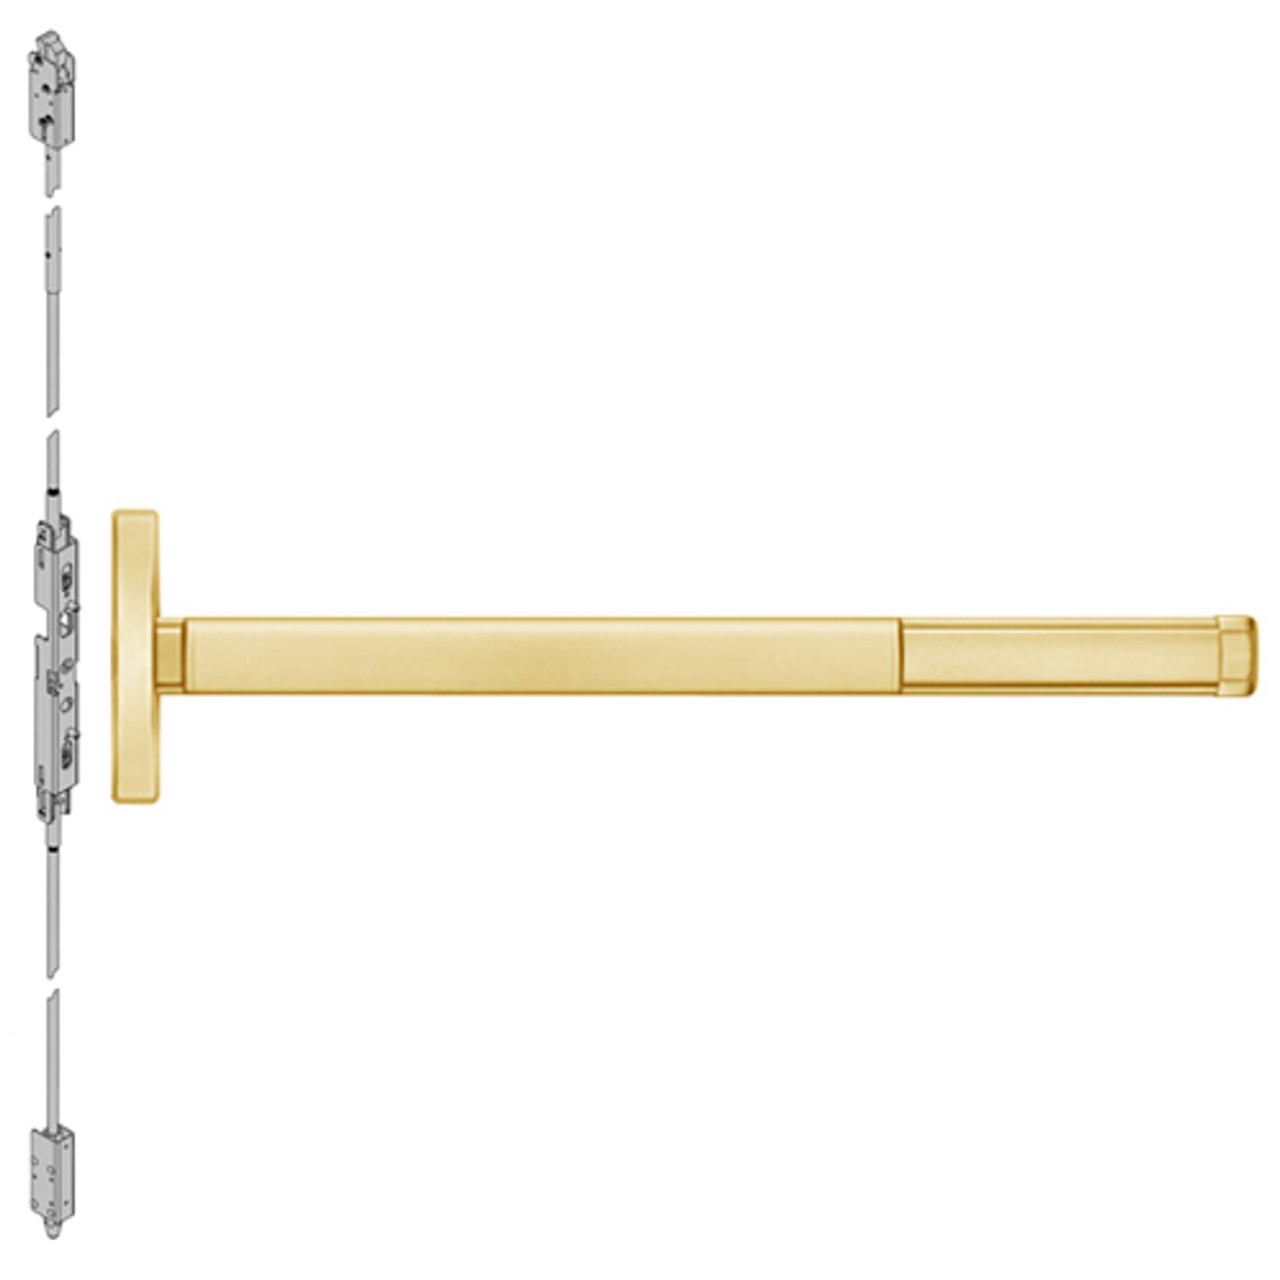 MLR2608-605-48 PHI 2600 Series Concealed Vertical Rod Exit Device with Motorized Latch Retraction Prepped for Key Controls Lever in Bright Brass Finish